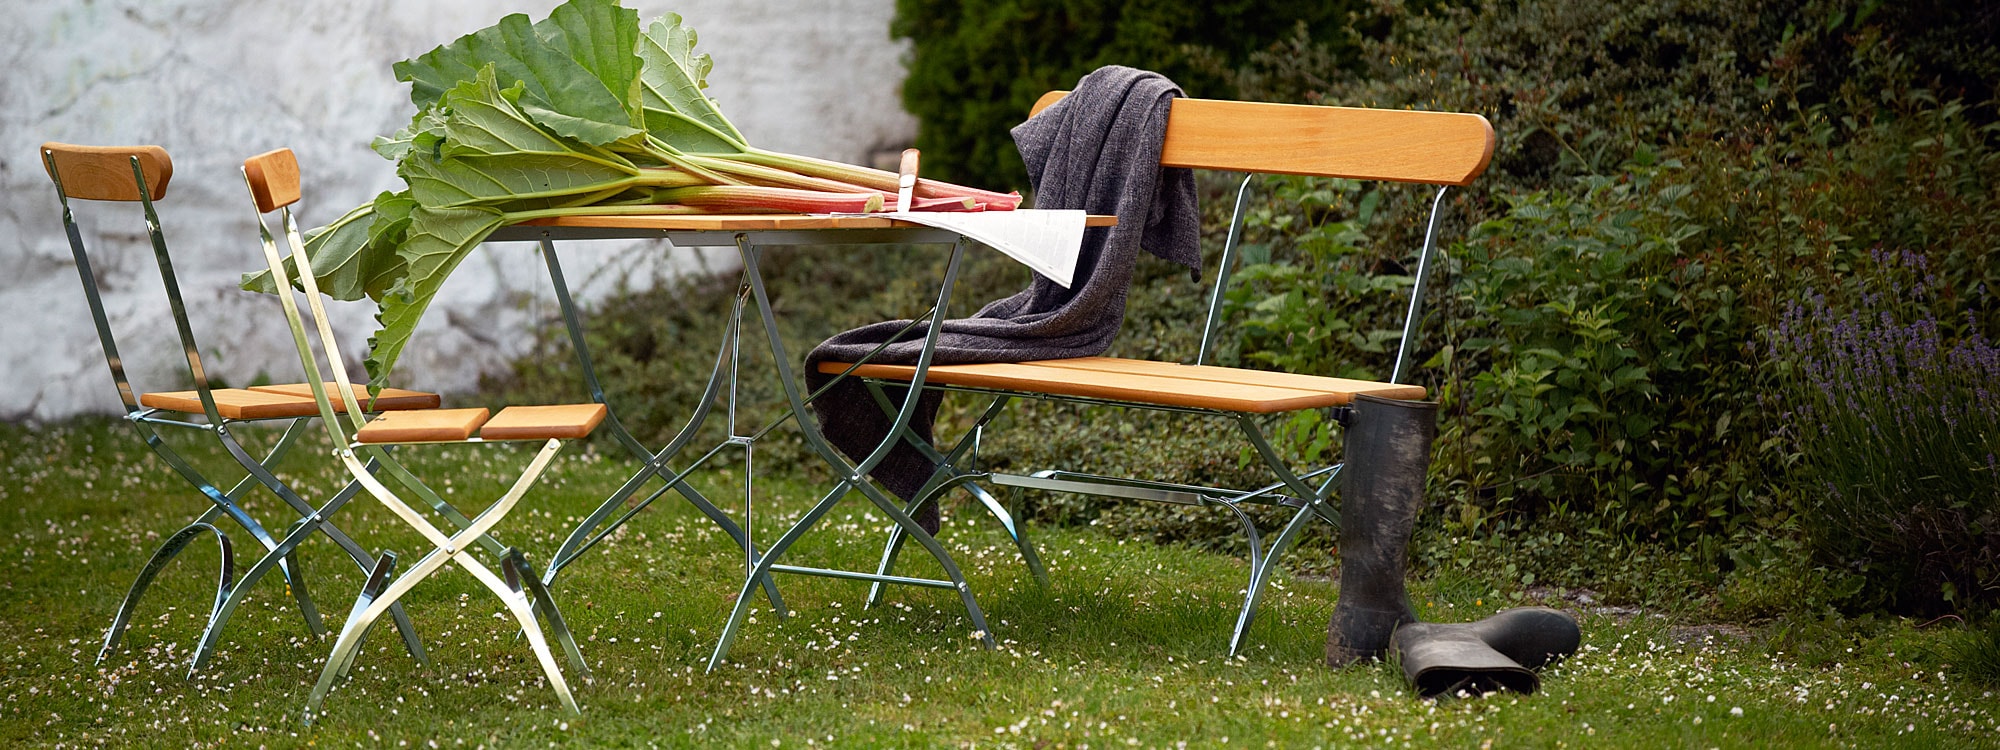 Image of Brewery traditional folding garden furniture by Grythyttan Stålmobler Swedish furniture, shown with bunch of rhubarb stems on the table.